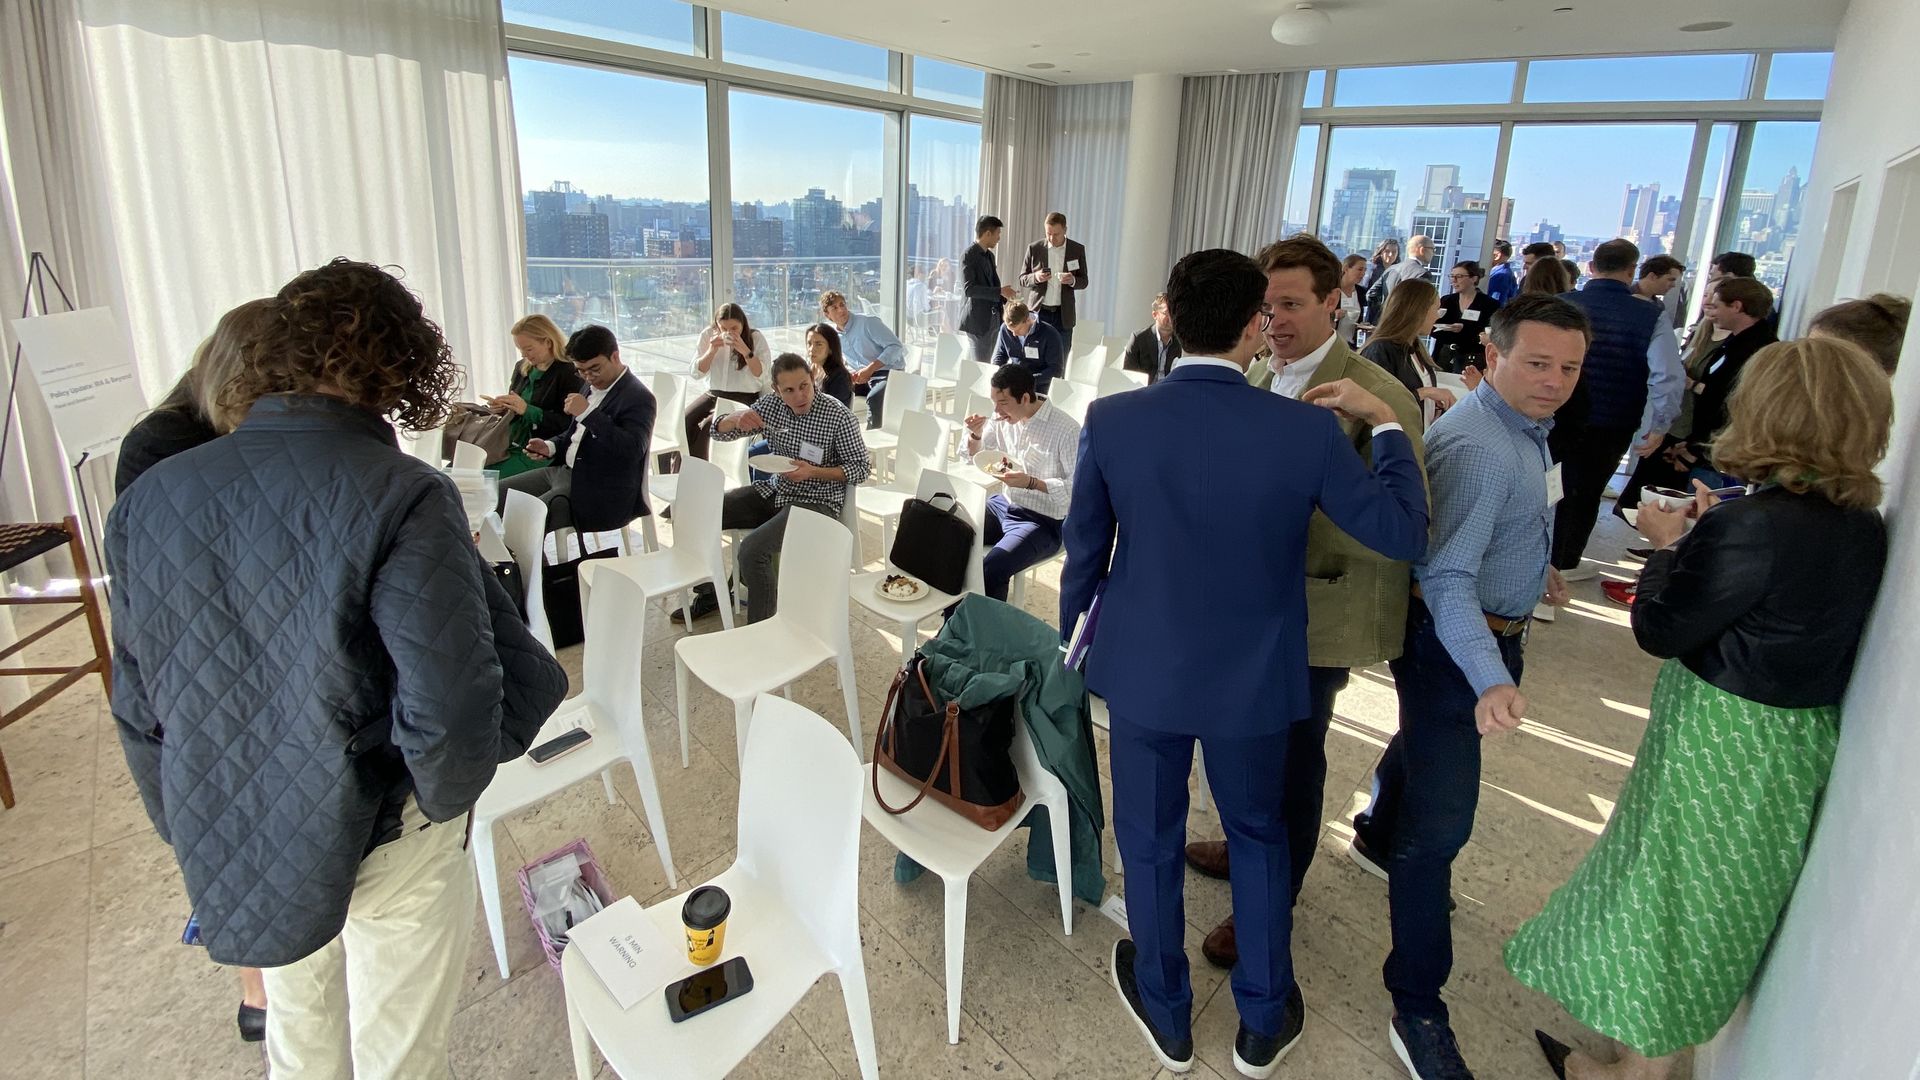 A photo of investors and founders chatting ahead of a panel, amid white chairs and a few white curtains, in a window-filled penthouse in NYC.